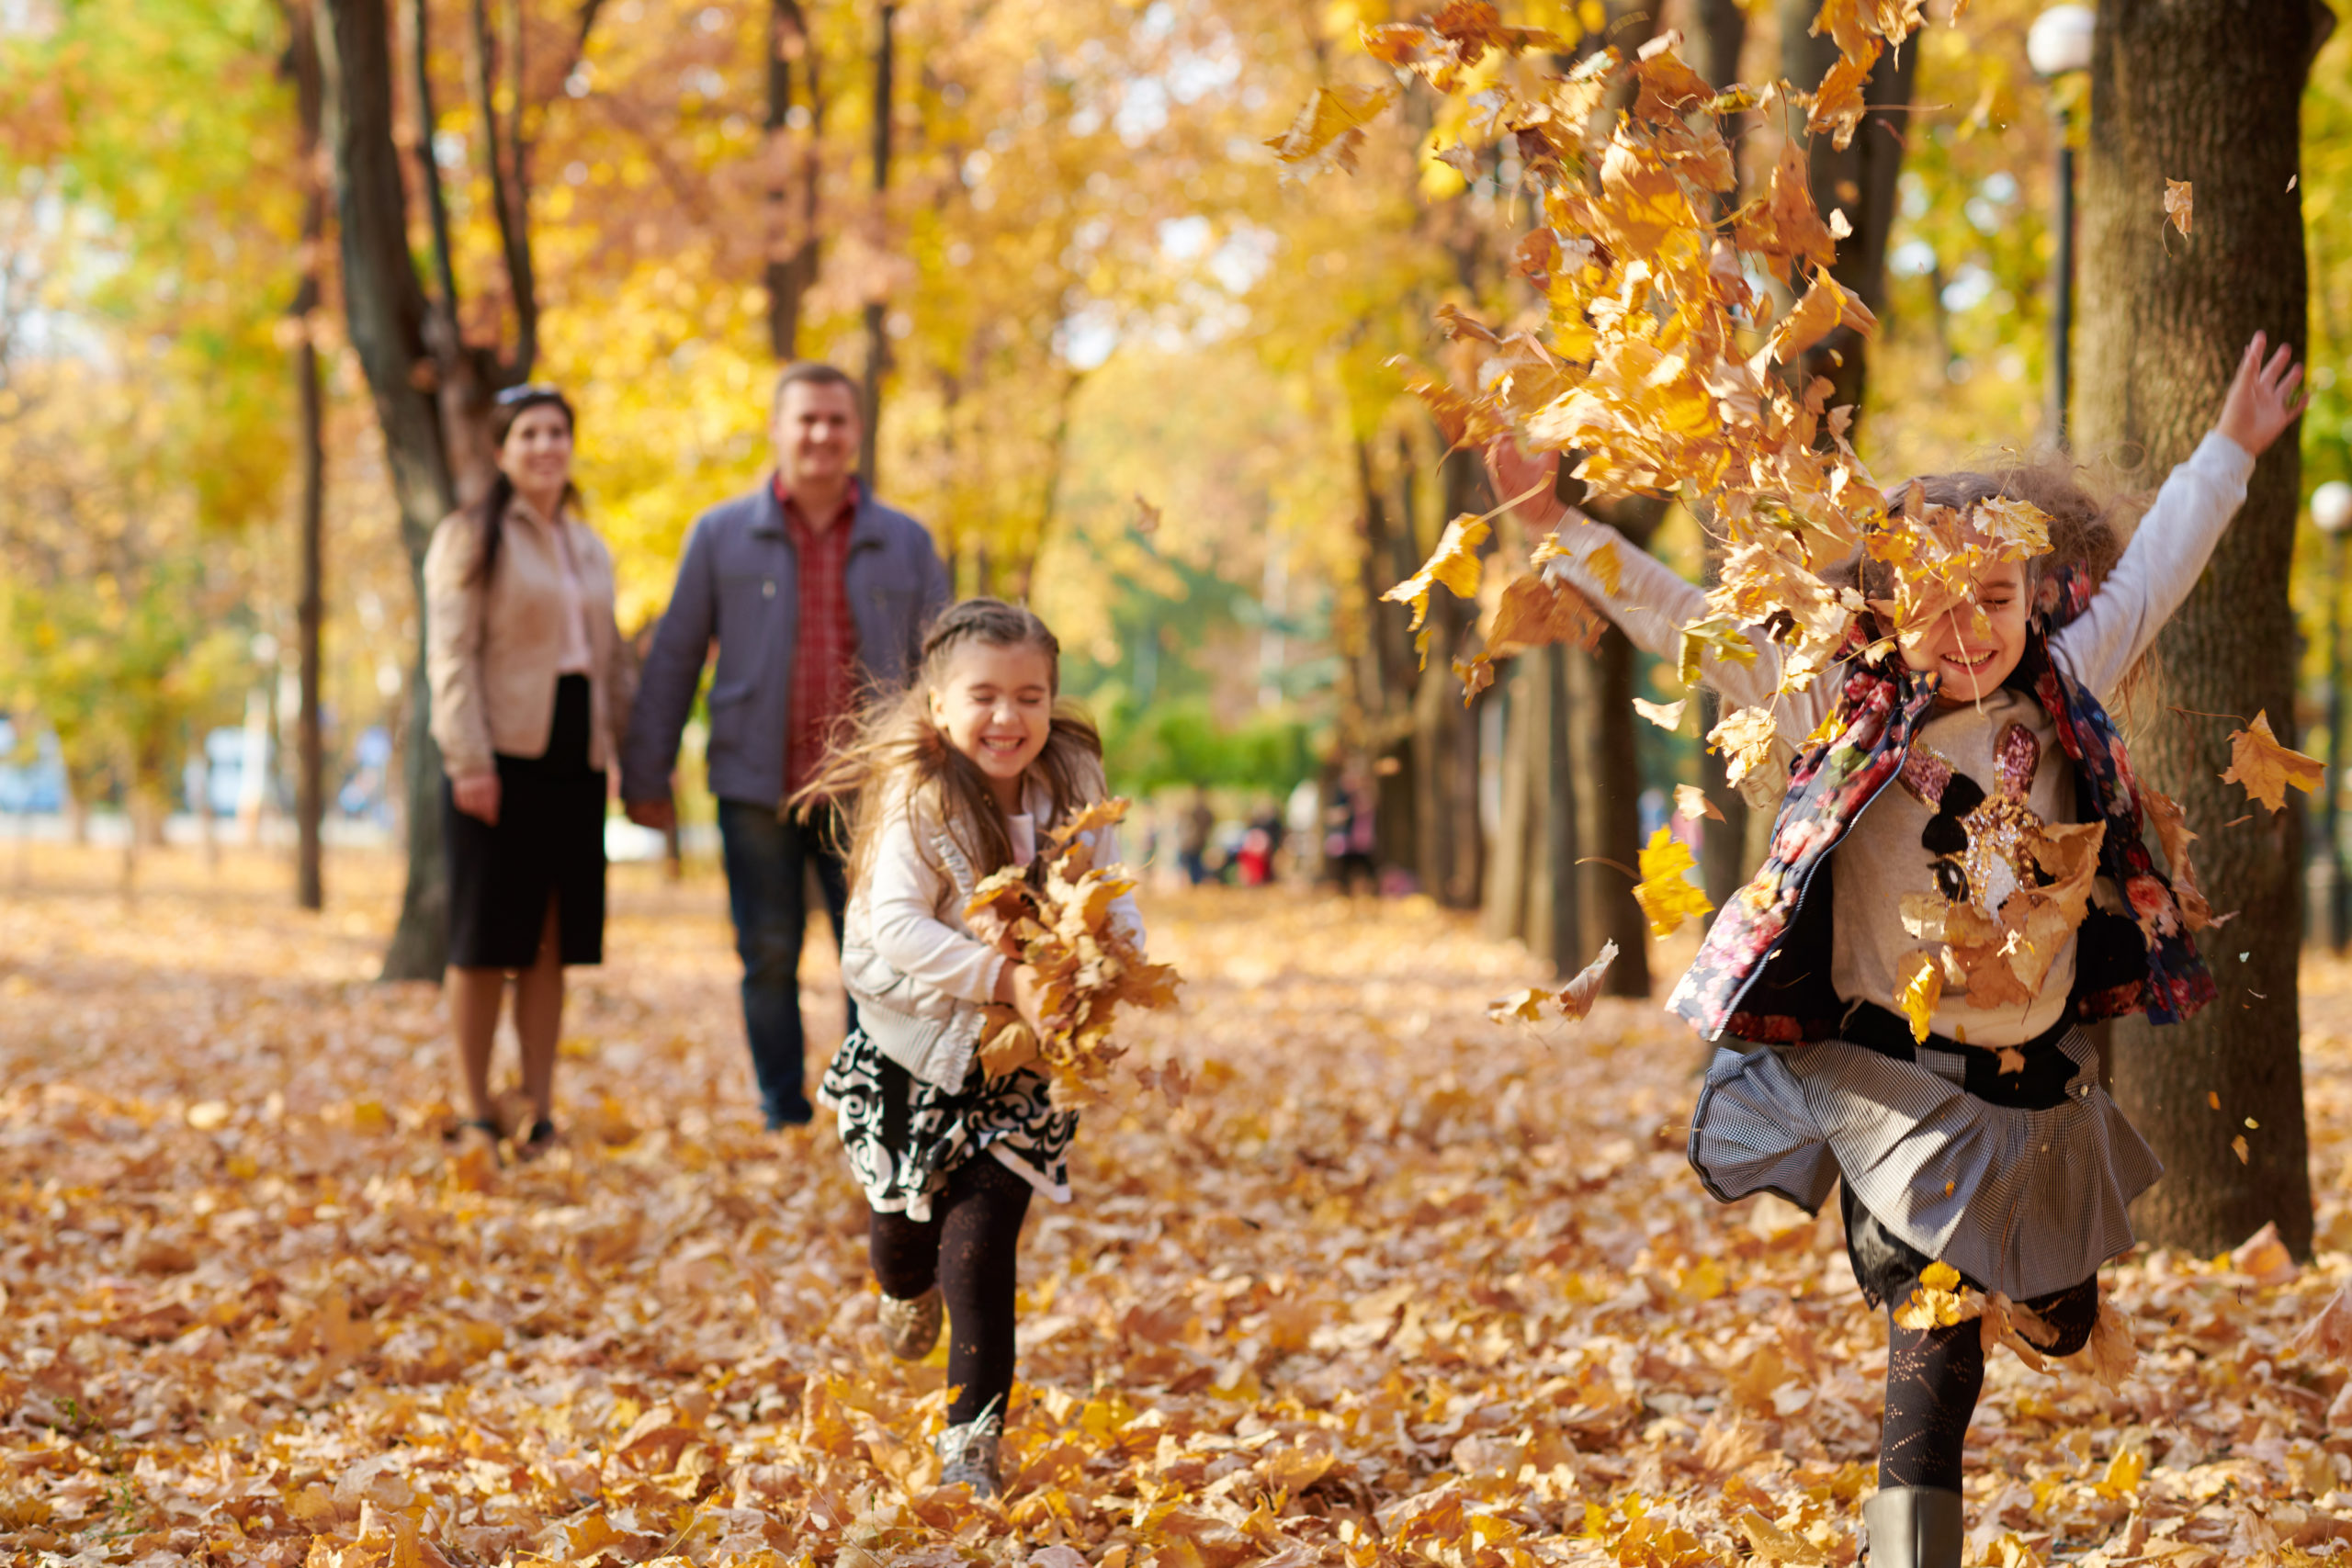 Fun Fall Activities for the Family